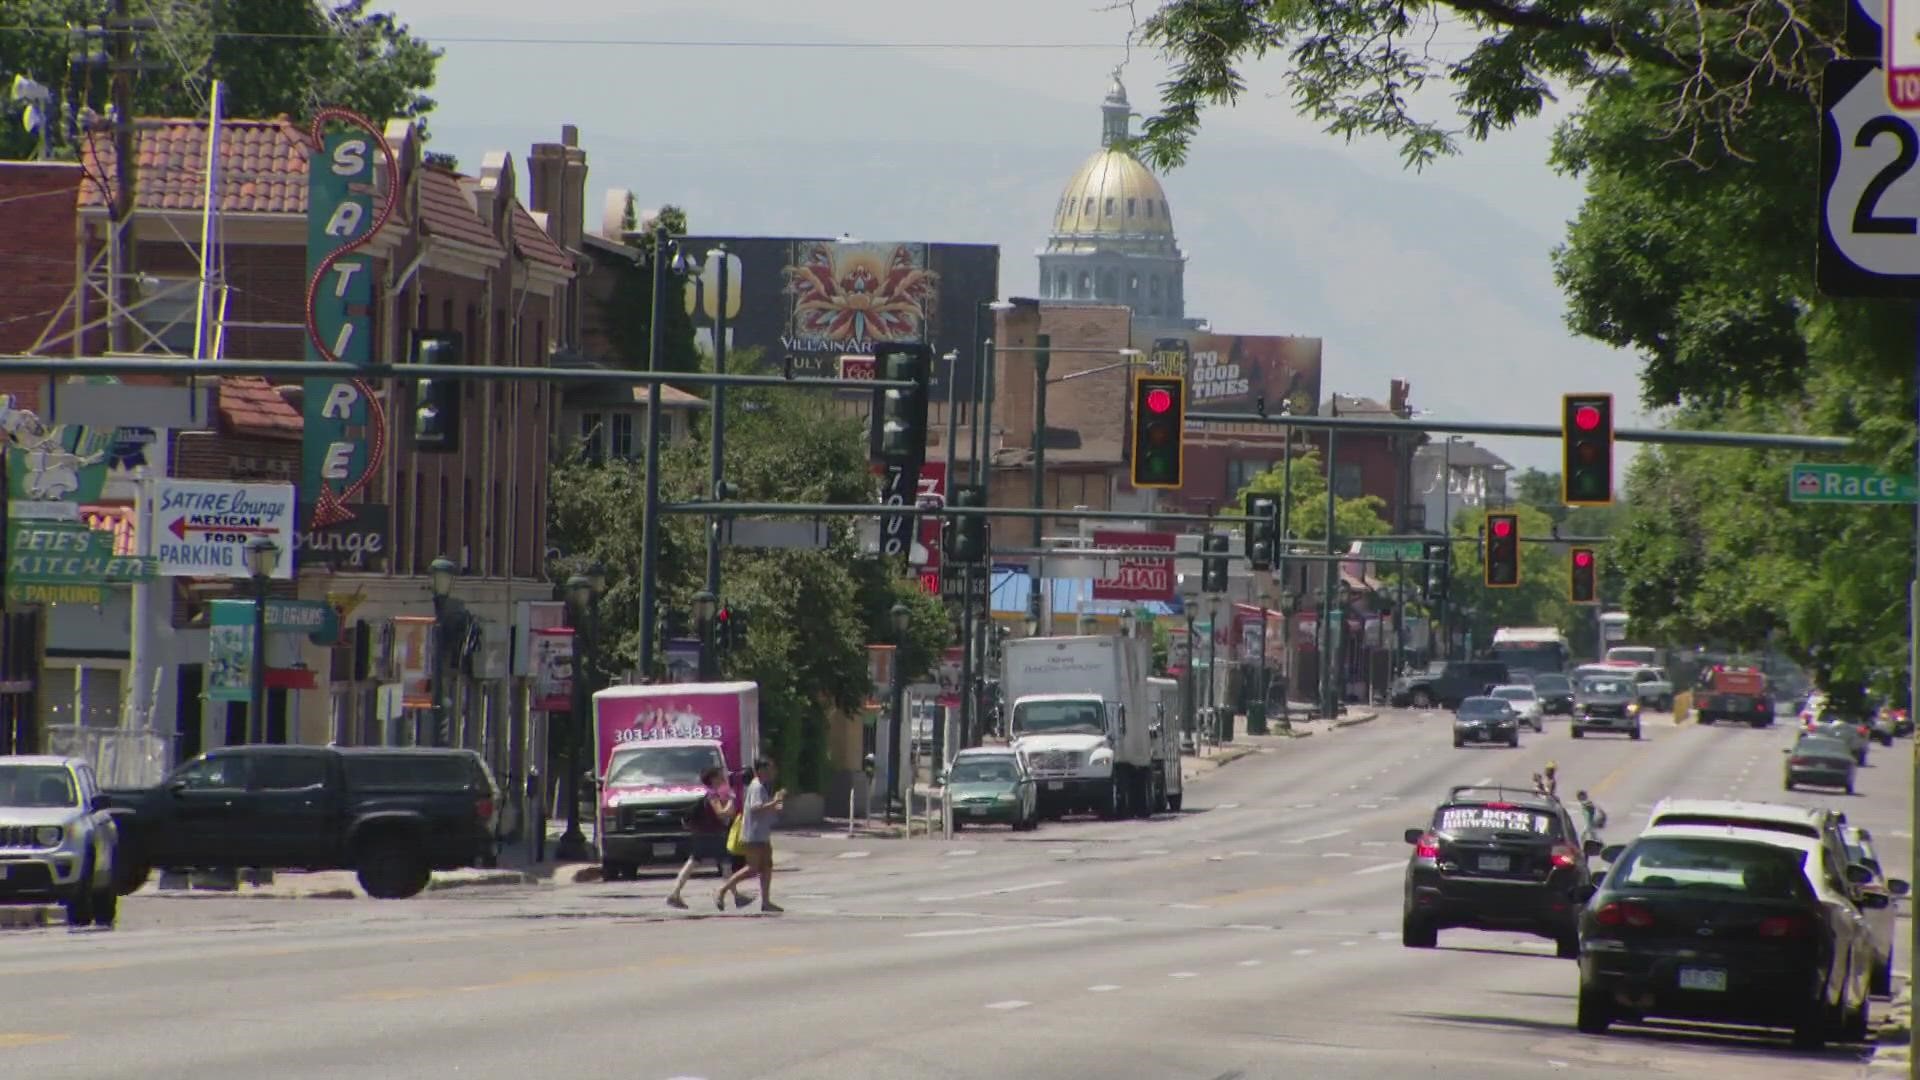 The Denver City Council voted Monday night to adopt a bill decriminalizing jaywalking in the city.